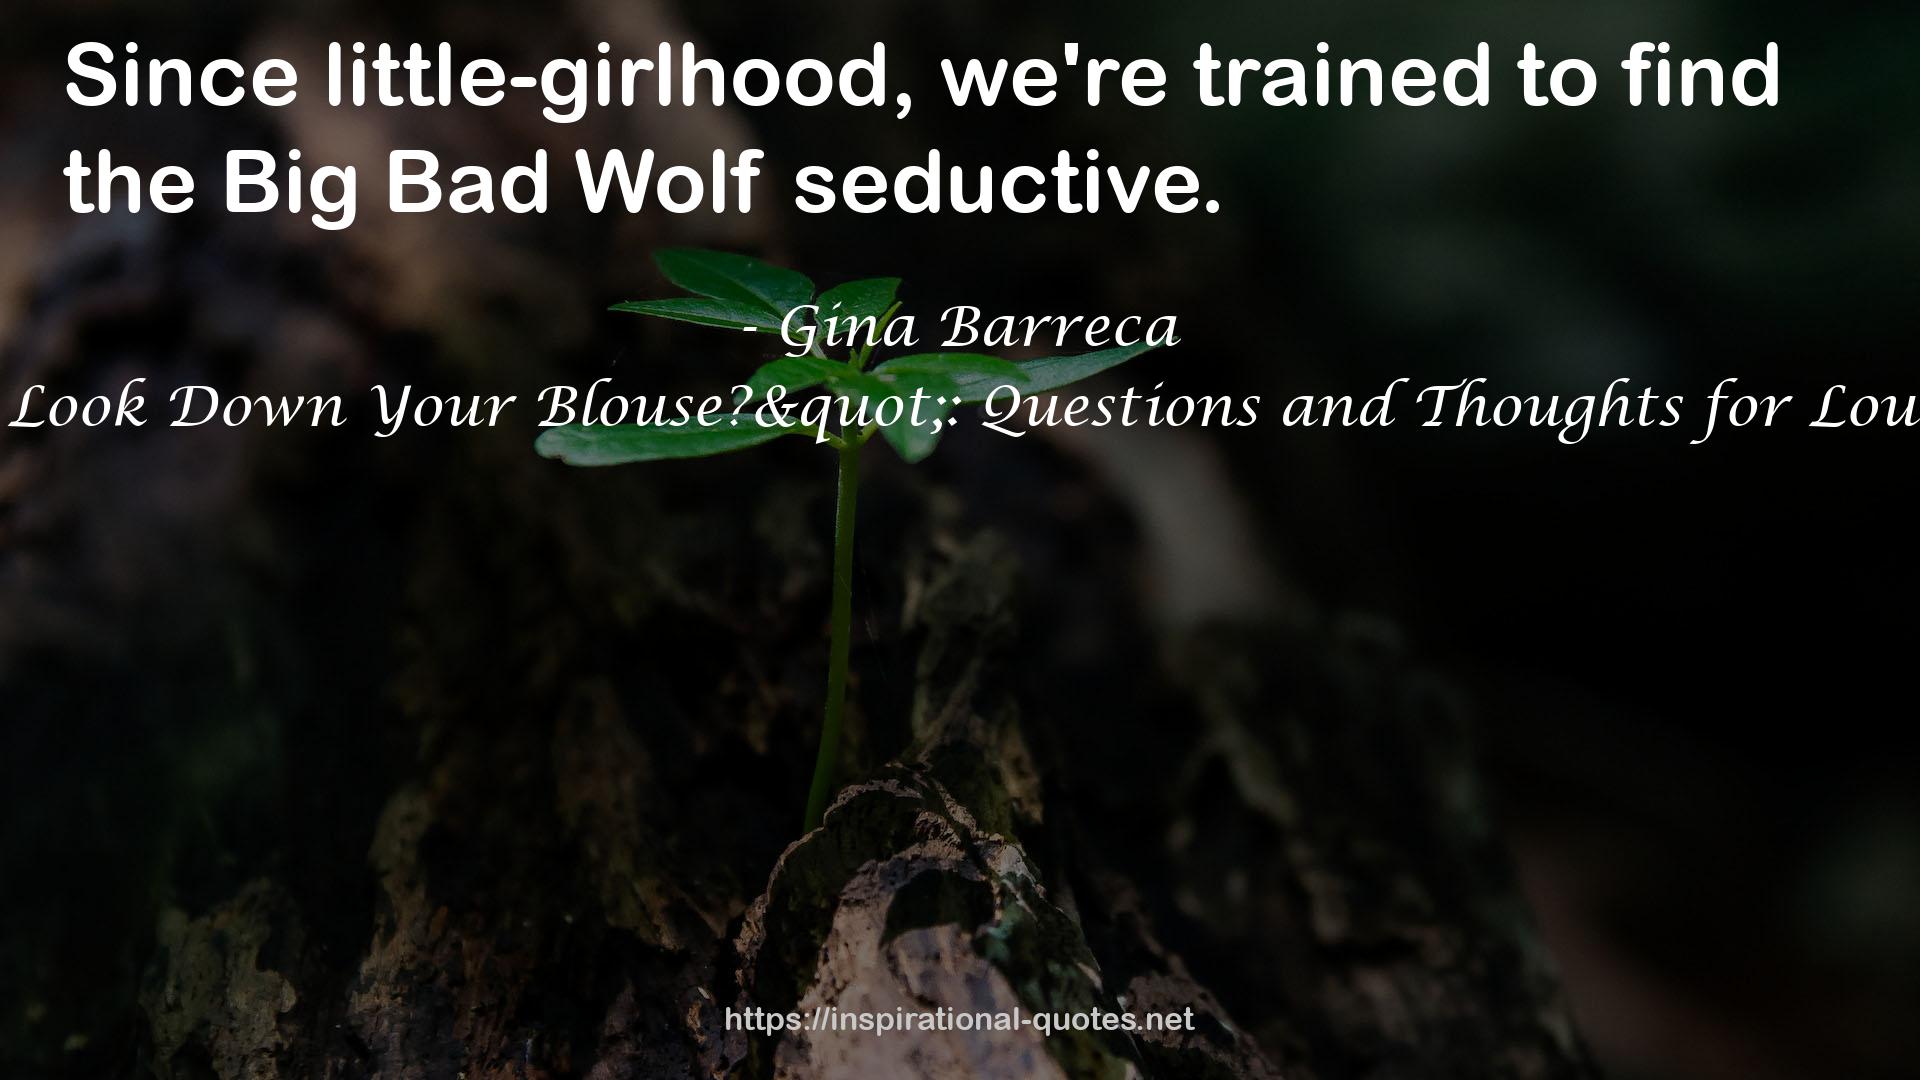 Gina Barreca quote : Since little-girlhood, we're trained to find the Big Bad Wolf seductive.